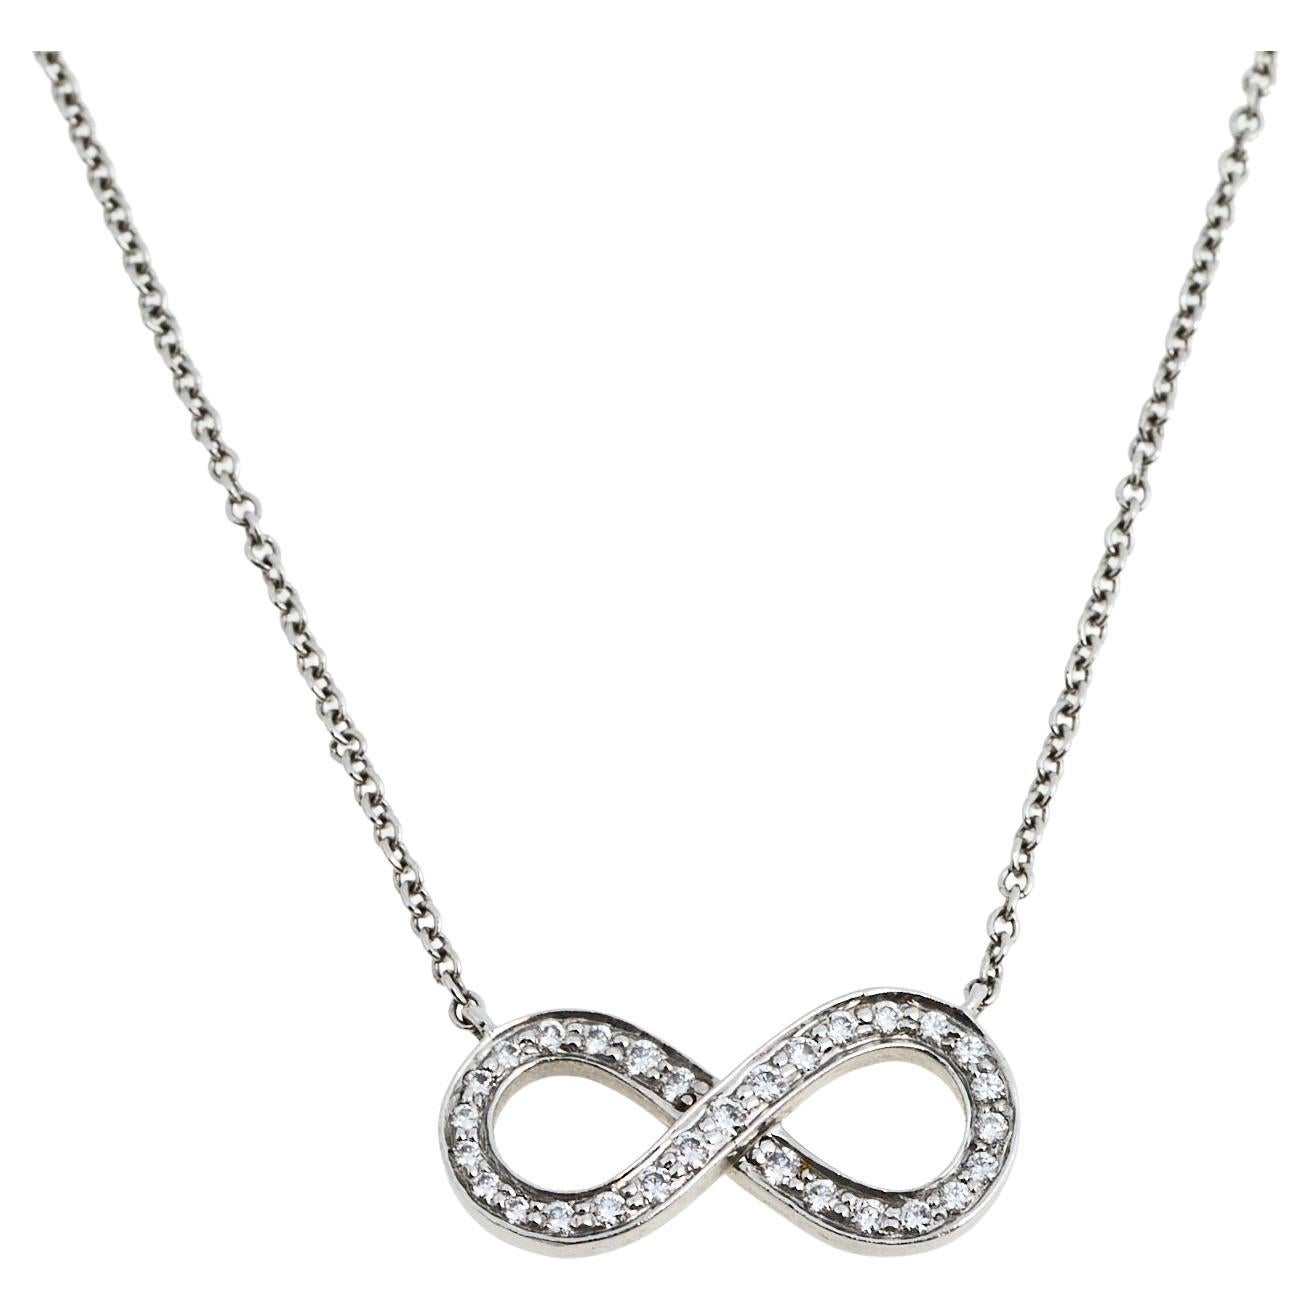 Tiffany and Co. Infinity Diamant-Platin-Anhänger-Halskette bei 1stDibs